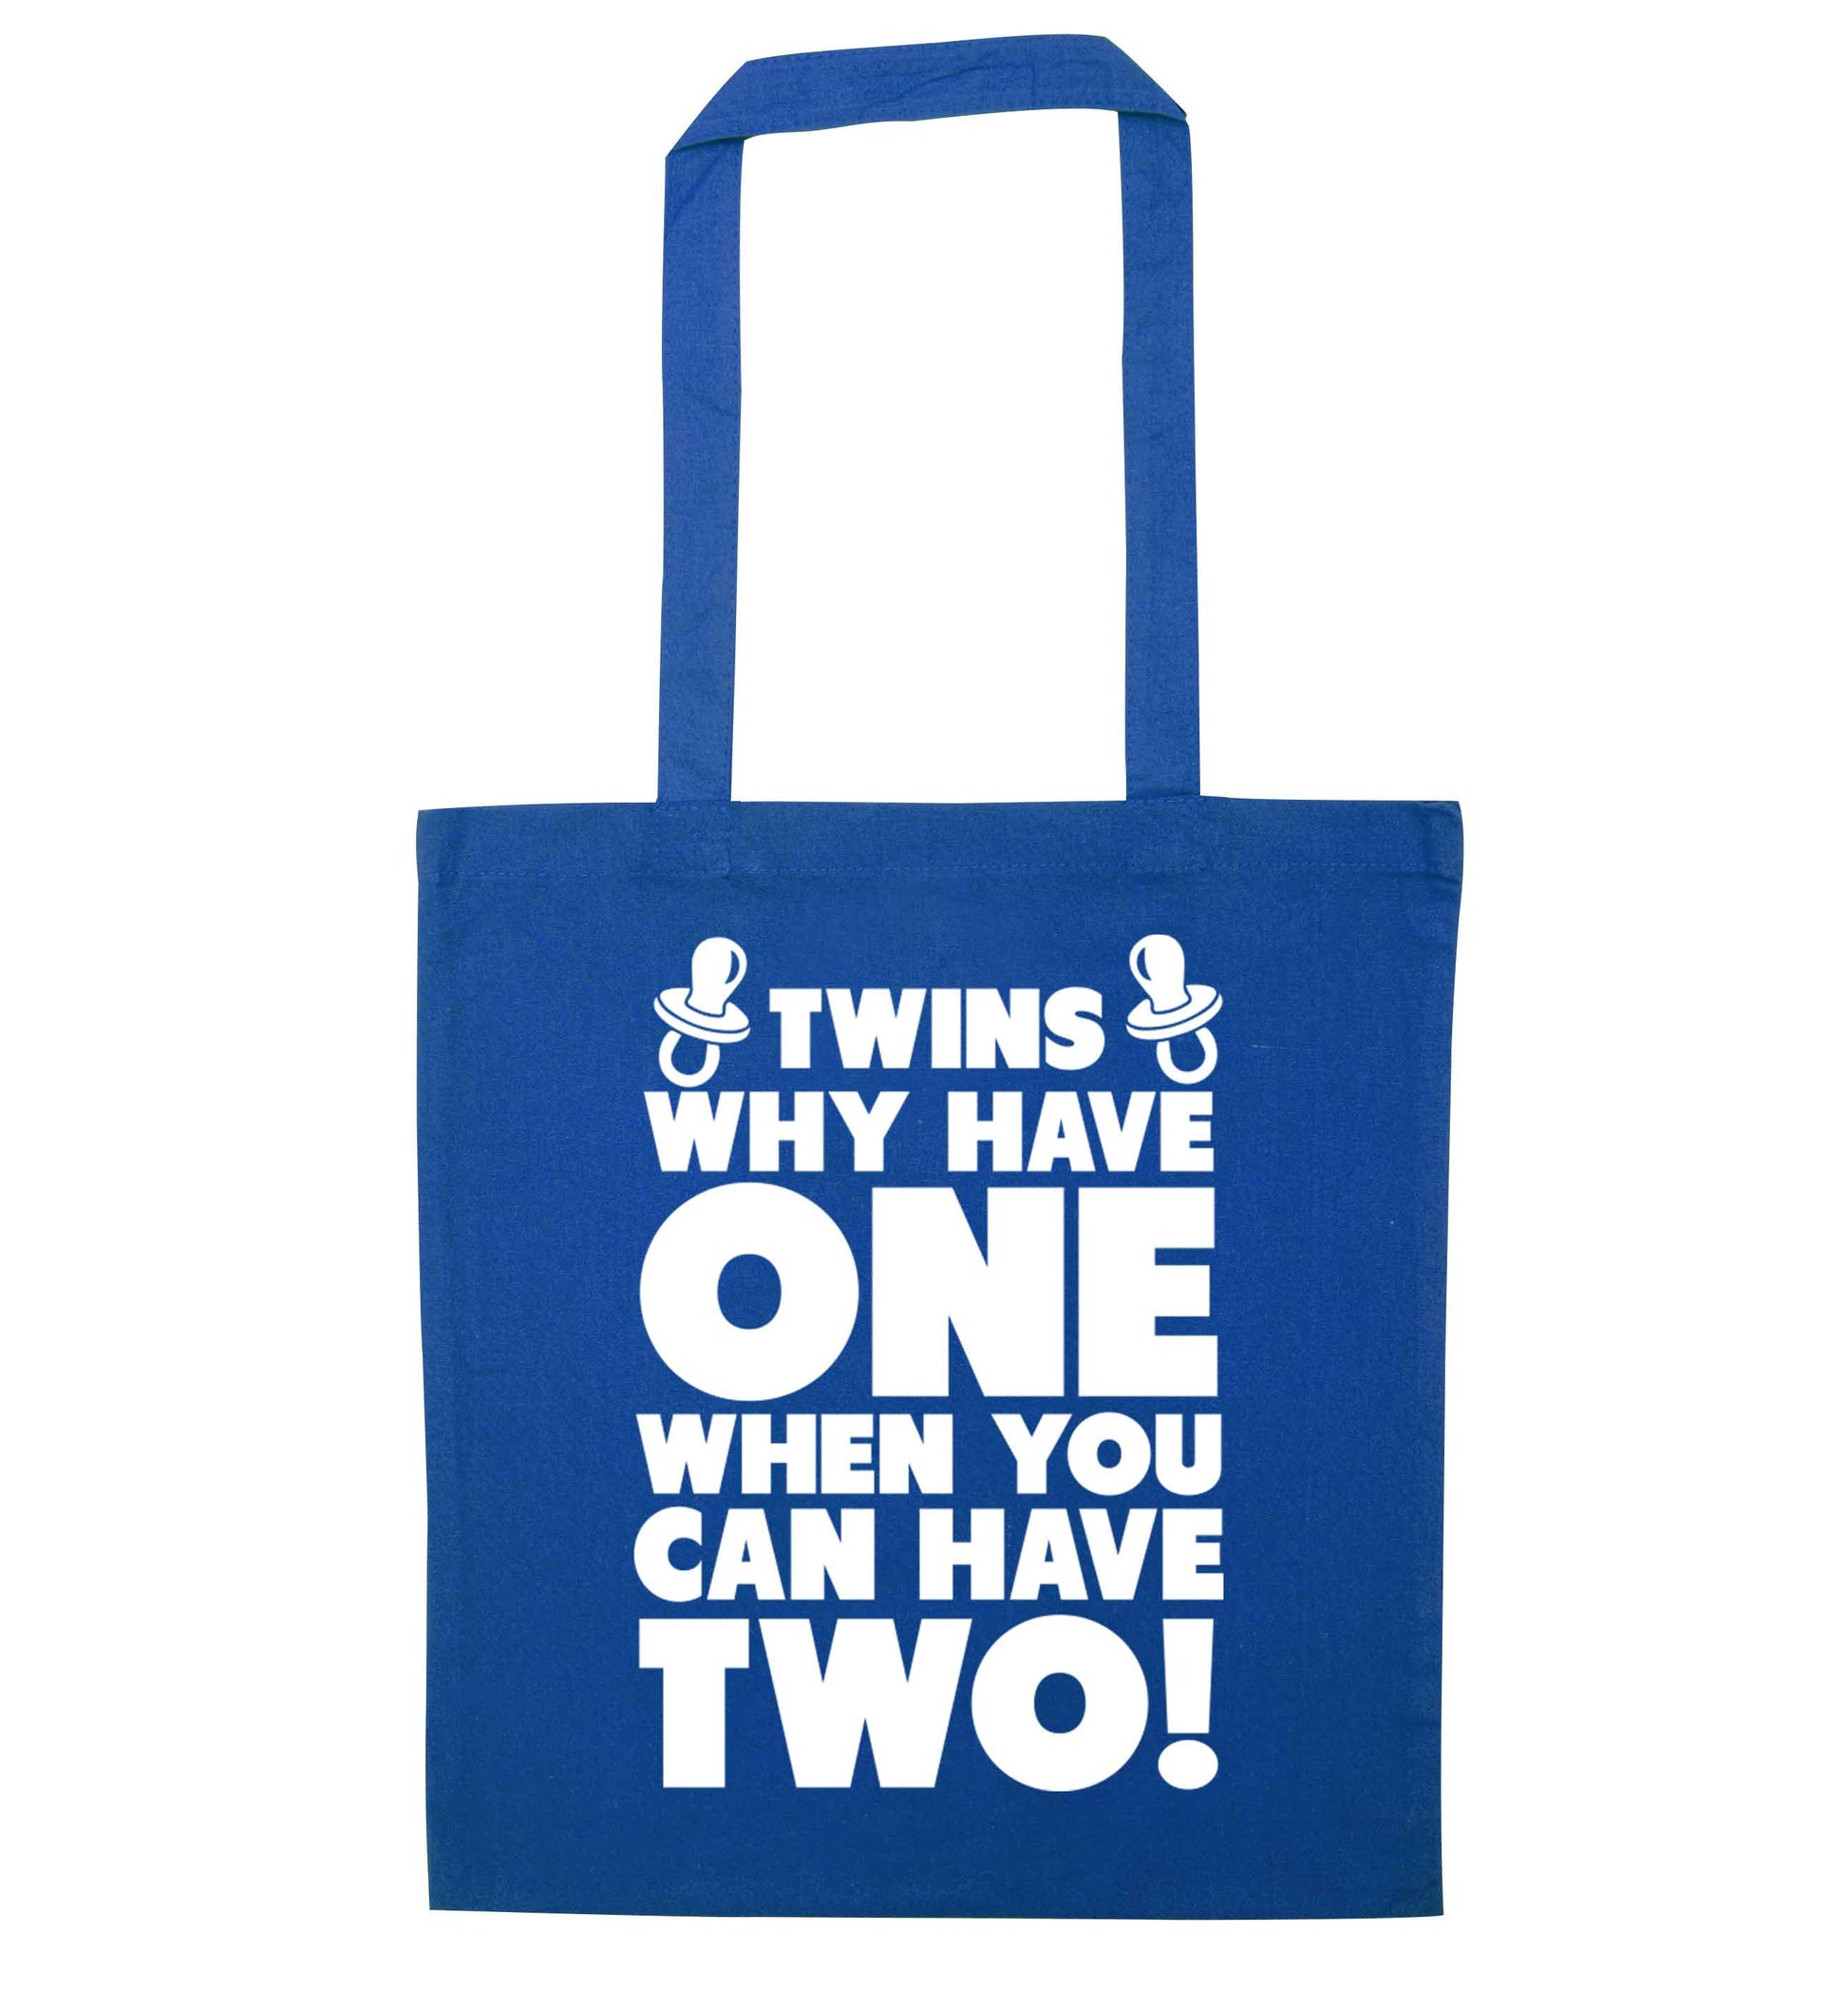 Twins why have one when you can have two blue tote bag